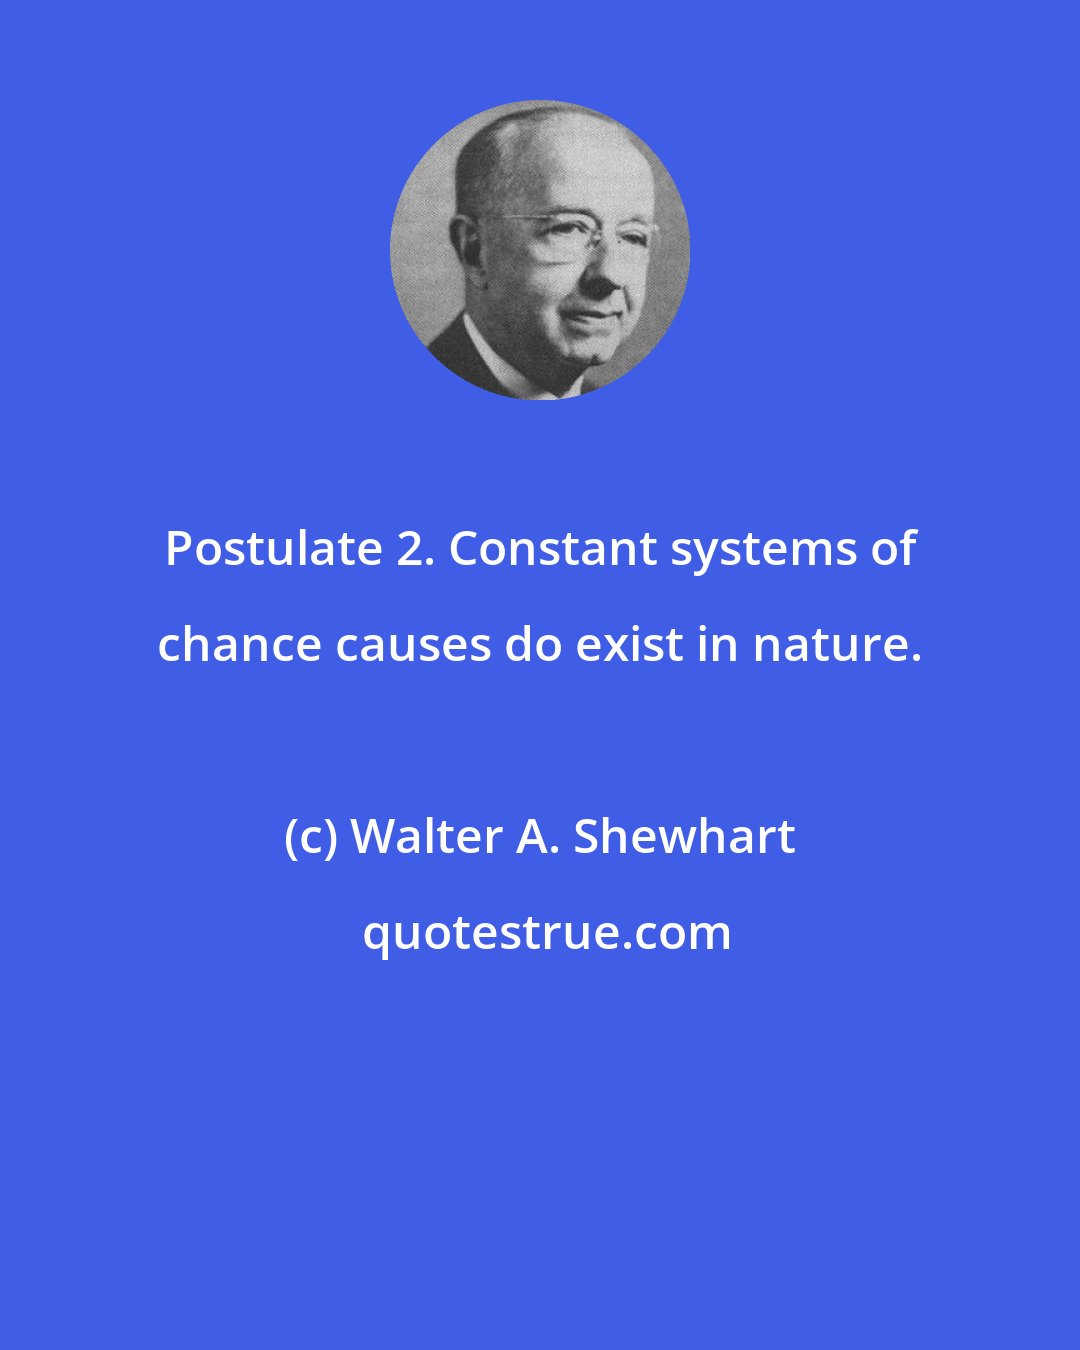 Walter A. Shewhart: Postulate 2. Constant systems of chance causes do exist in nature.